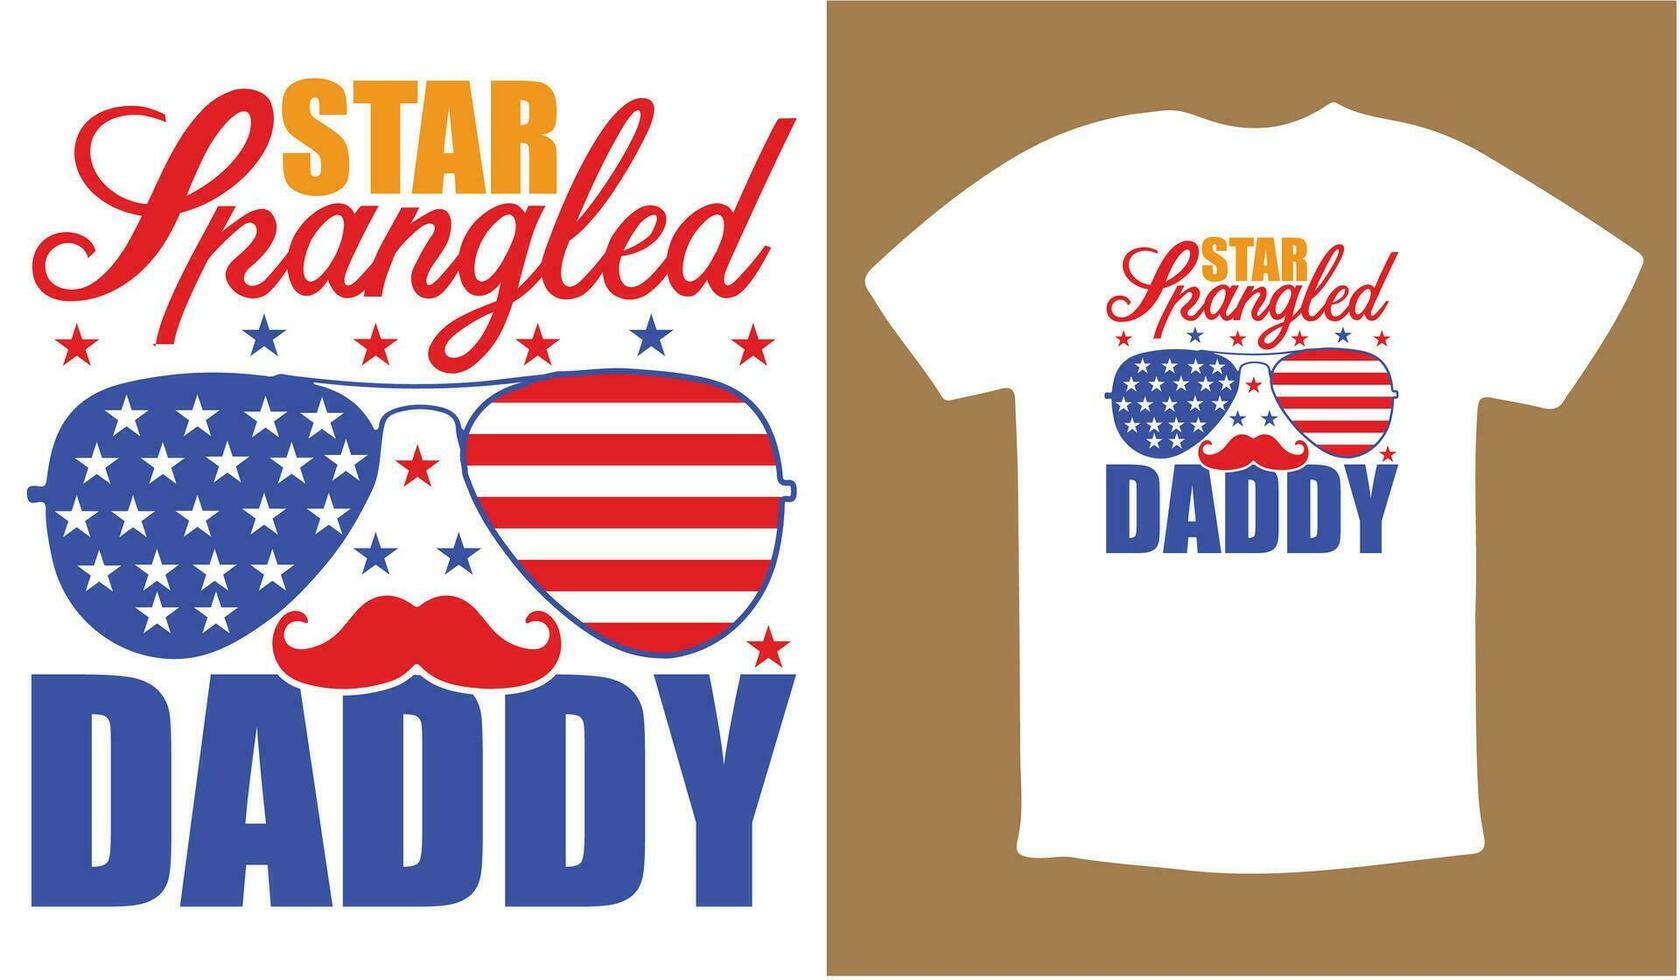 Star Spangled Daddy T-shirt vector